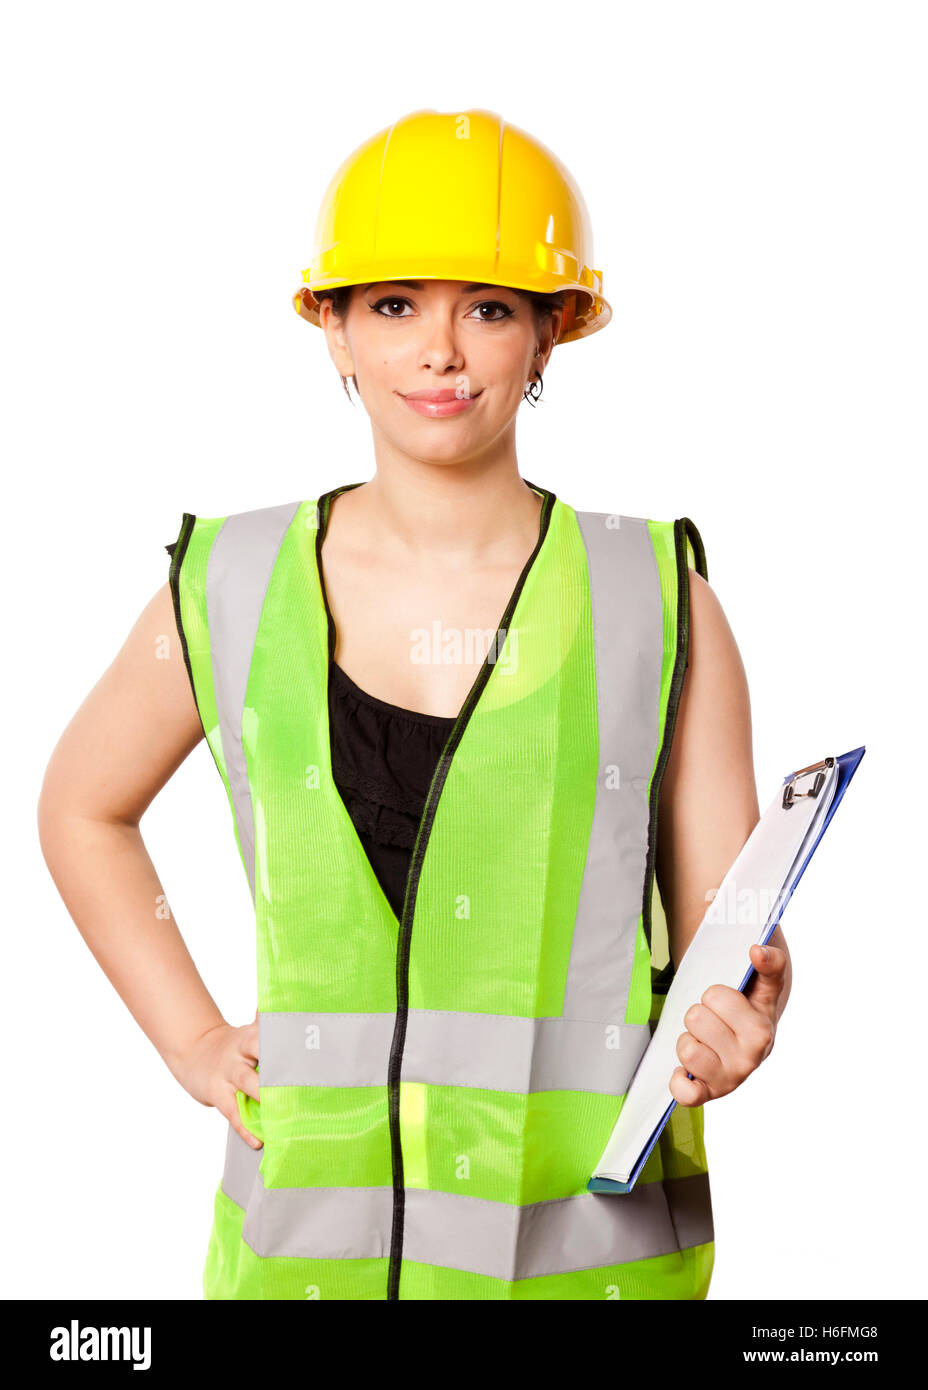 Caucasian young adult woman in her mid 20s wearing reflective yellow safety helmet and safety vest, giving the camera a smile wh Stock Photo